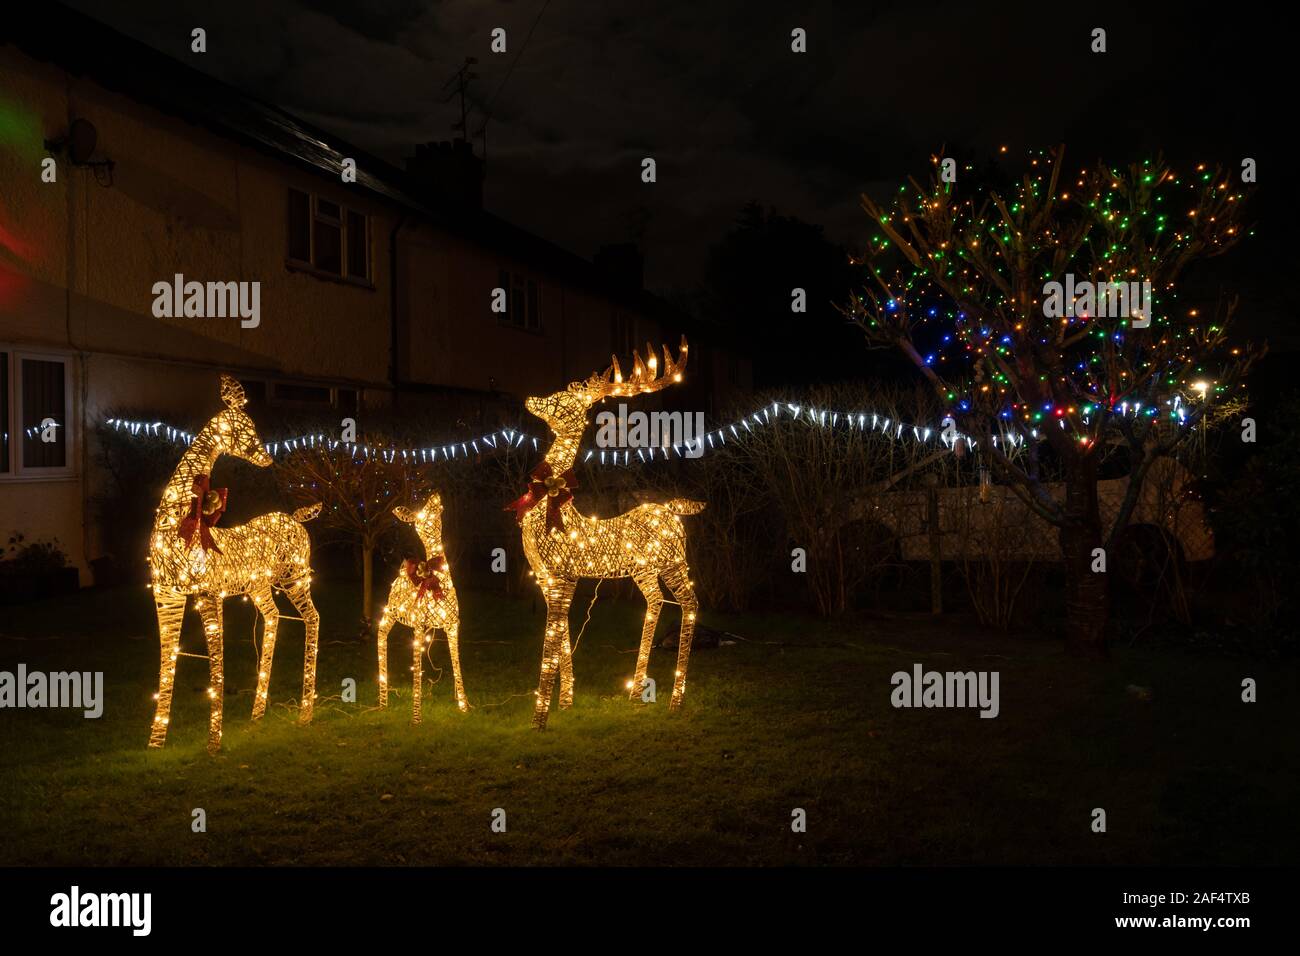 Large Wicker Reindeer Ornaments With Christmas Lights Lit Up In A Front Garden Uk Stock Photo Alamy